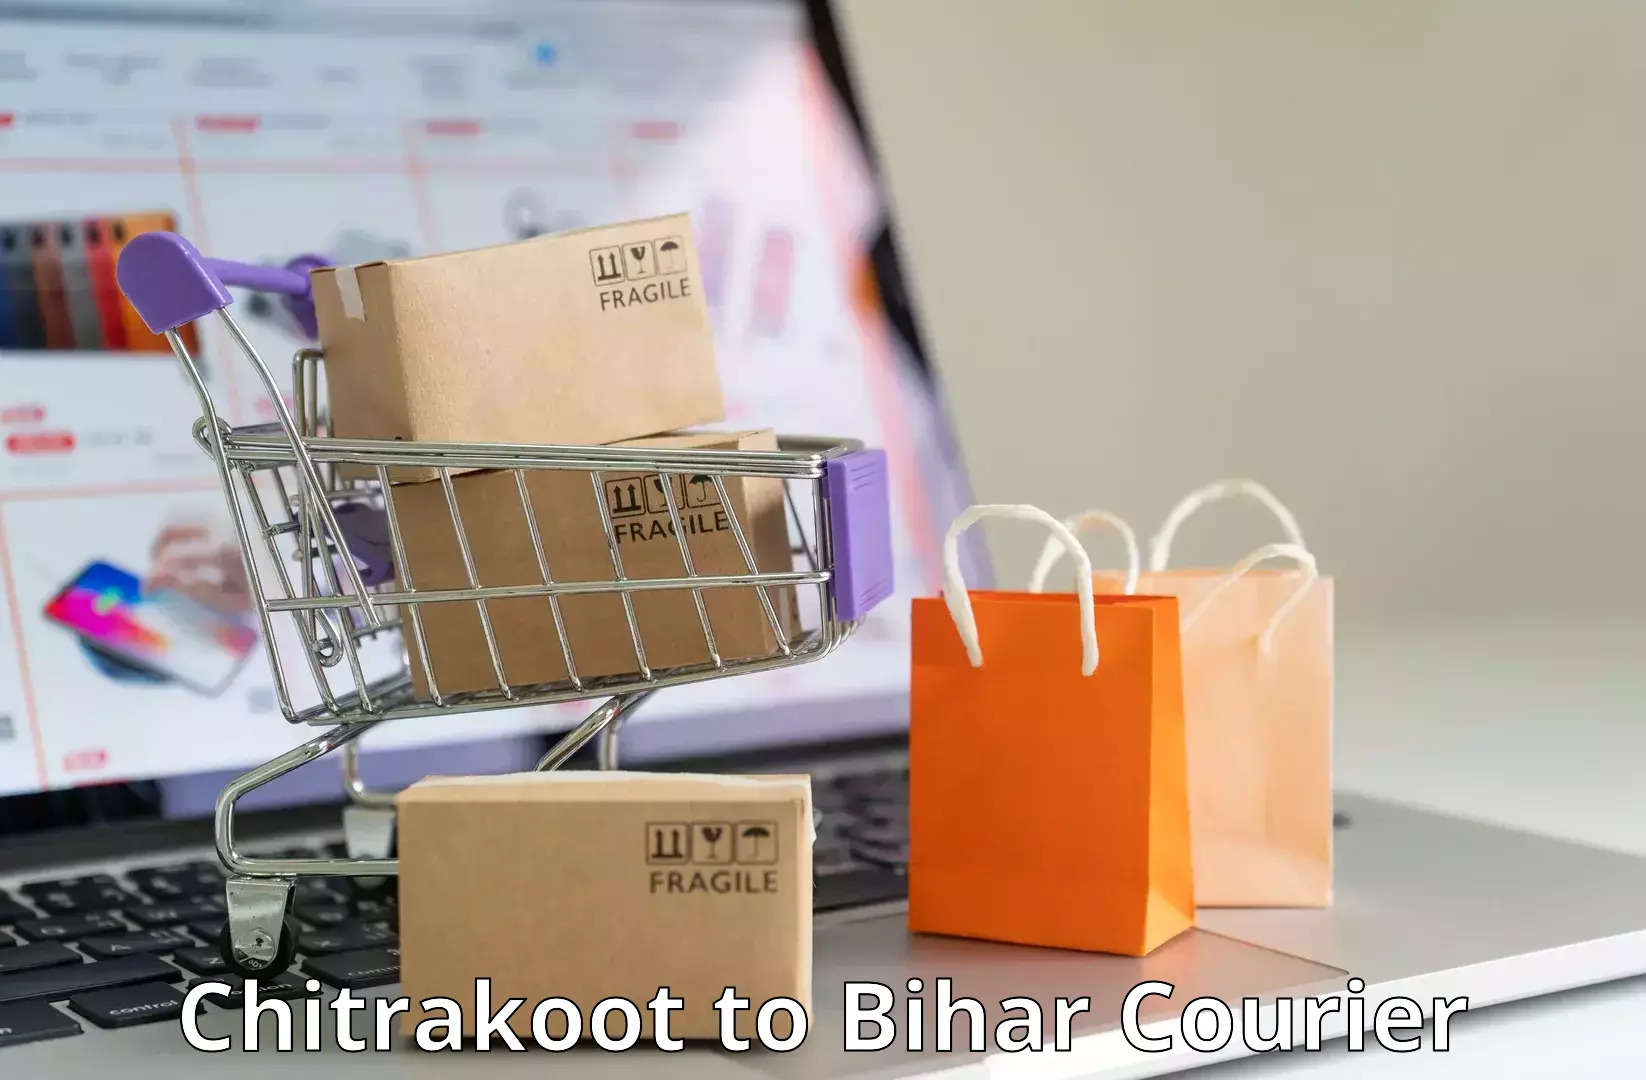 24/7 courier service in Chitrakoot to Bihar